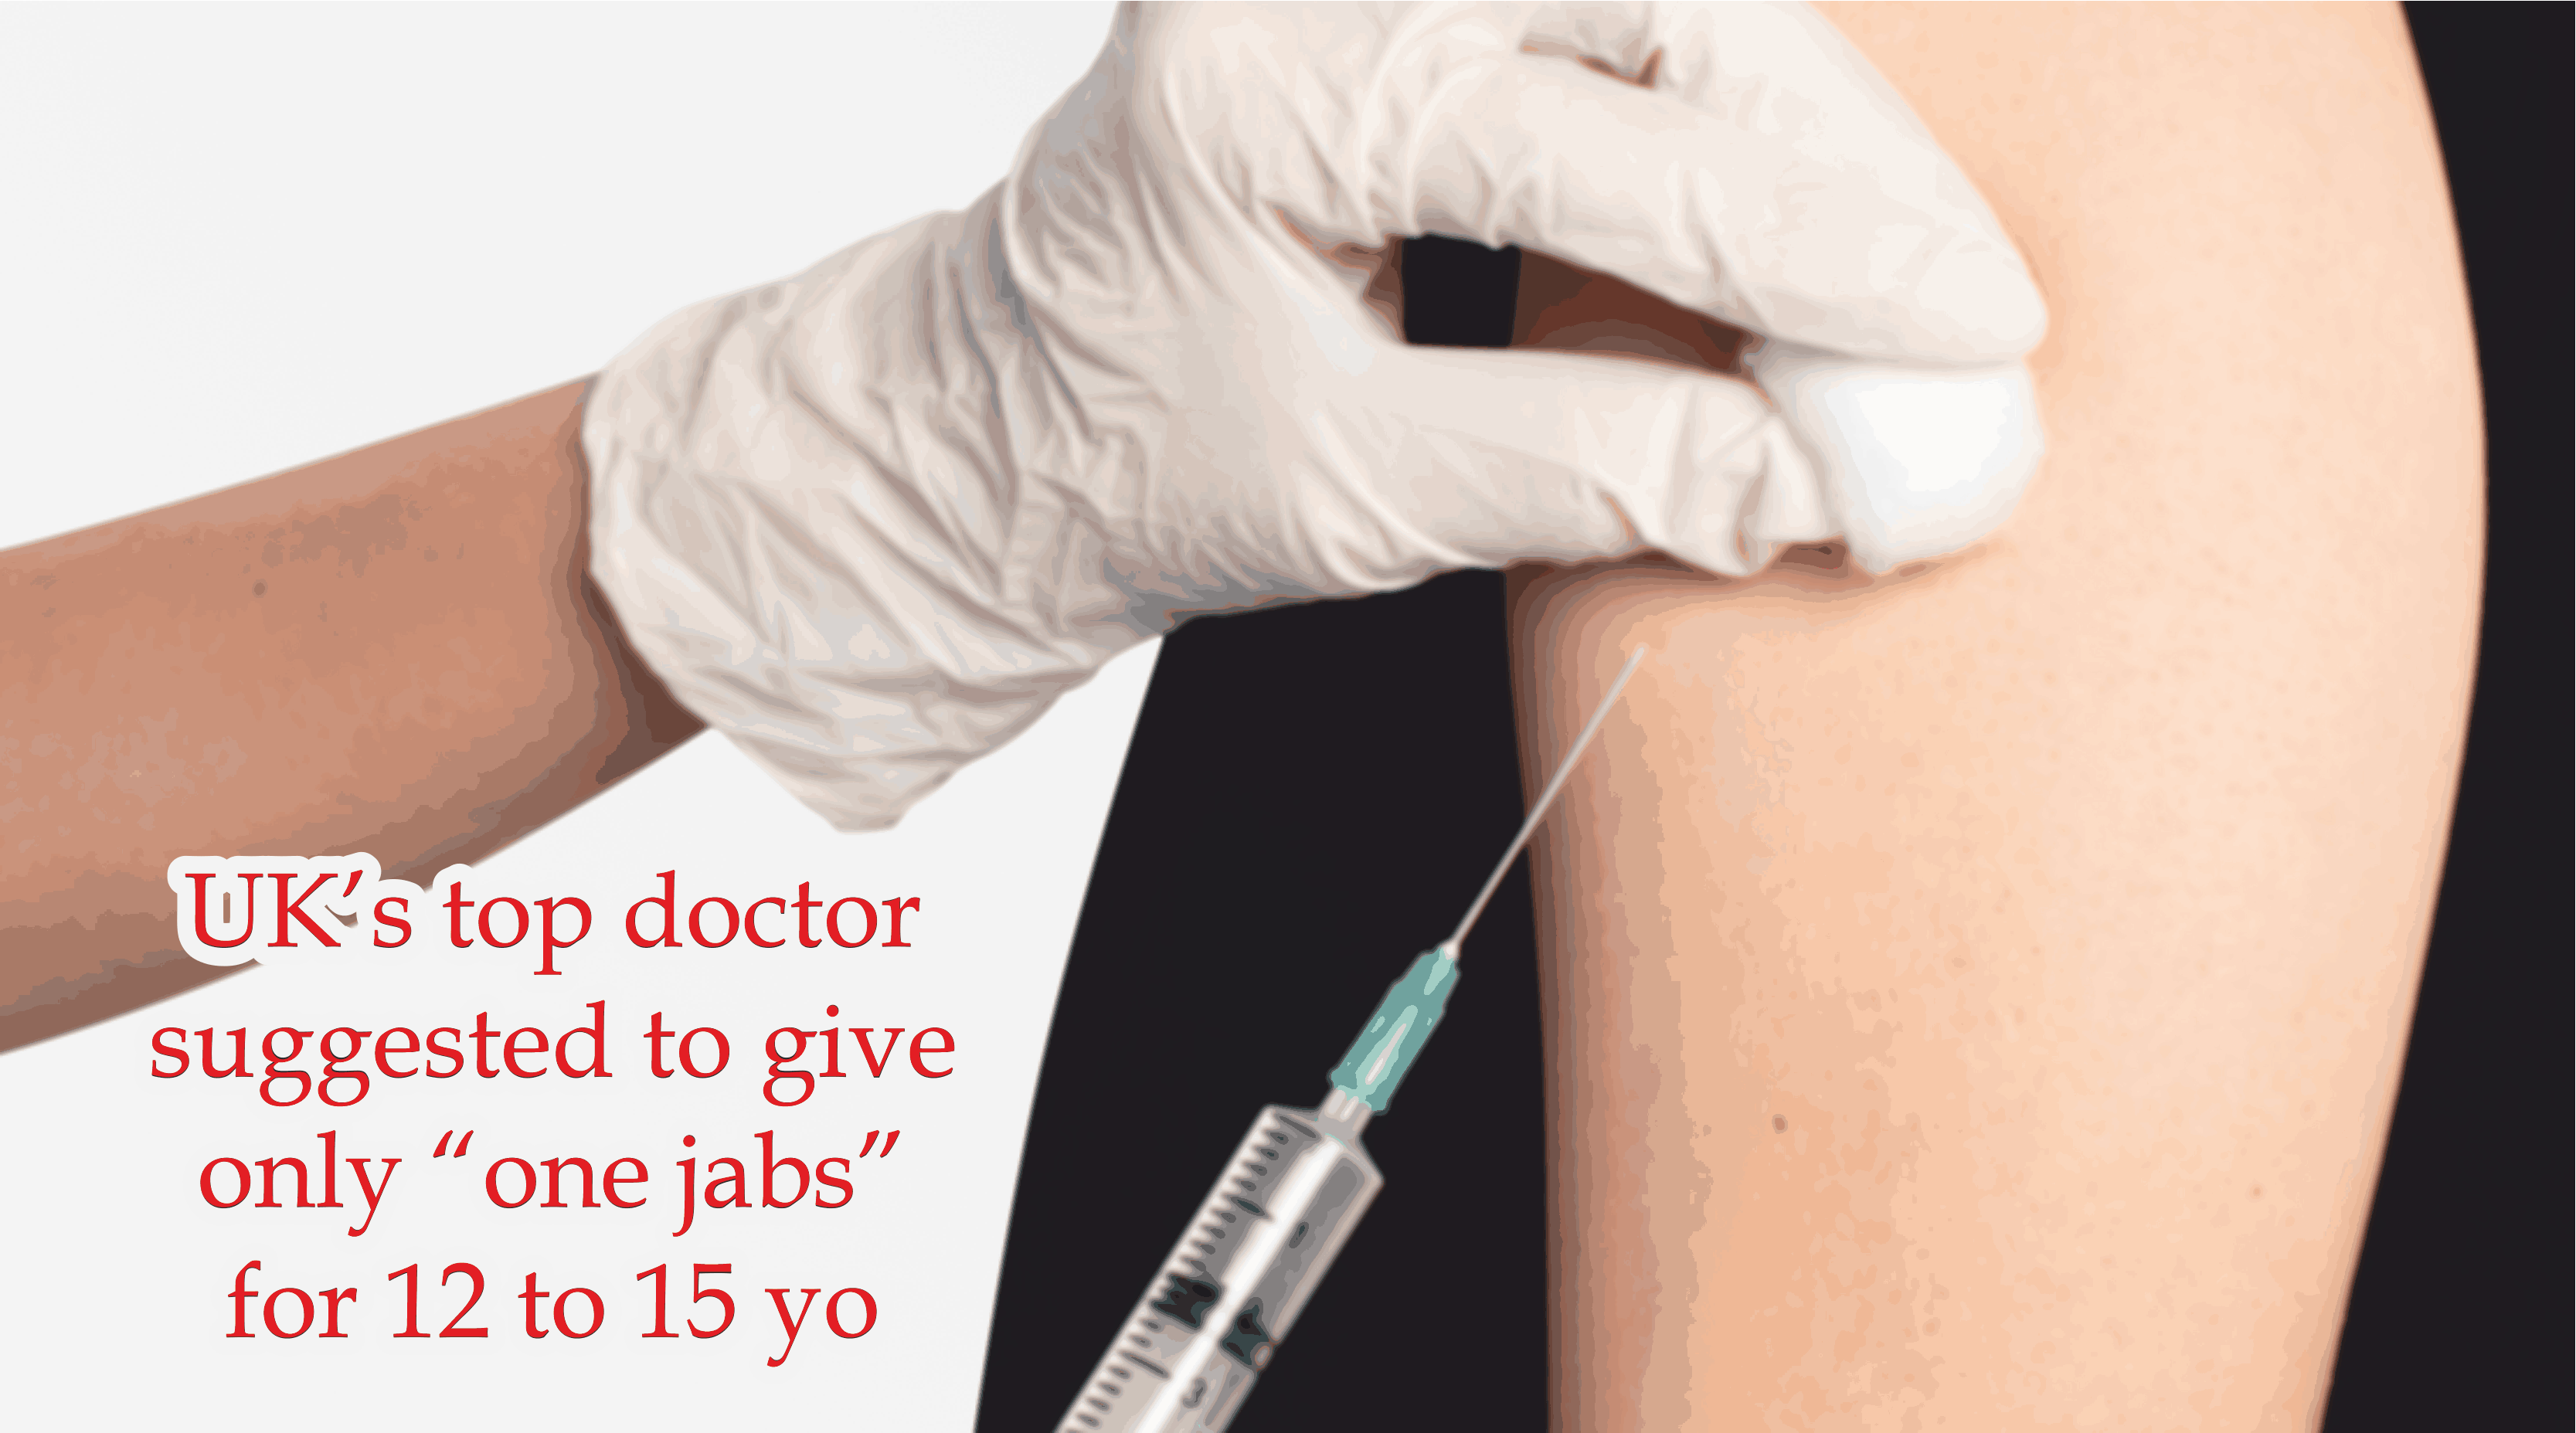 UK’s top doctor suggested to give only “one jabs” for 12 to 15 yo